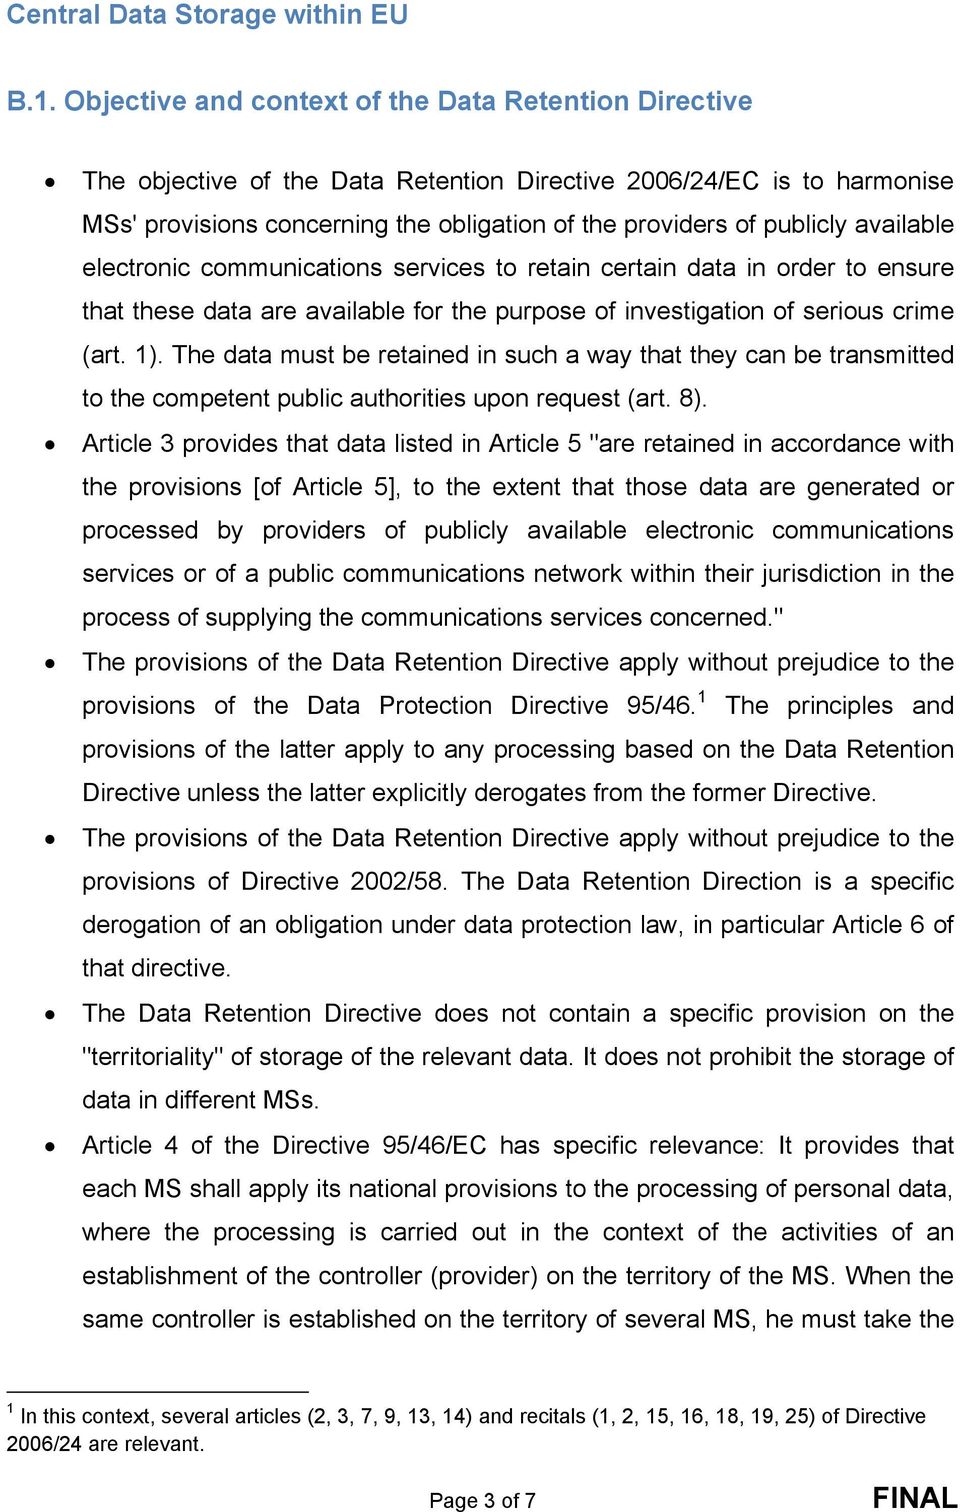 available electronic communications services to retain certain data in order to ensure that these data are available for the purpose of investigation of serious crime (art. 1).